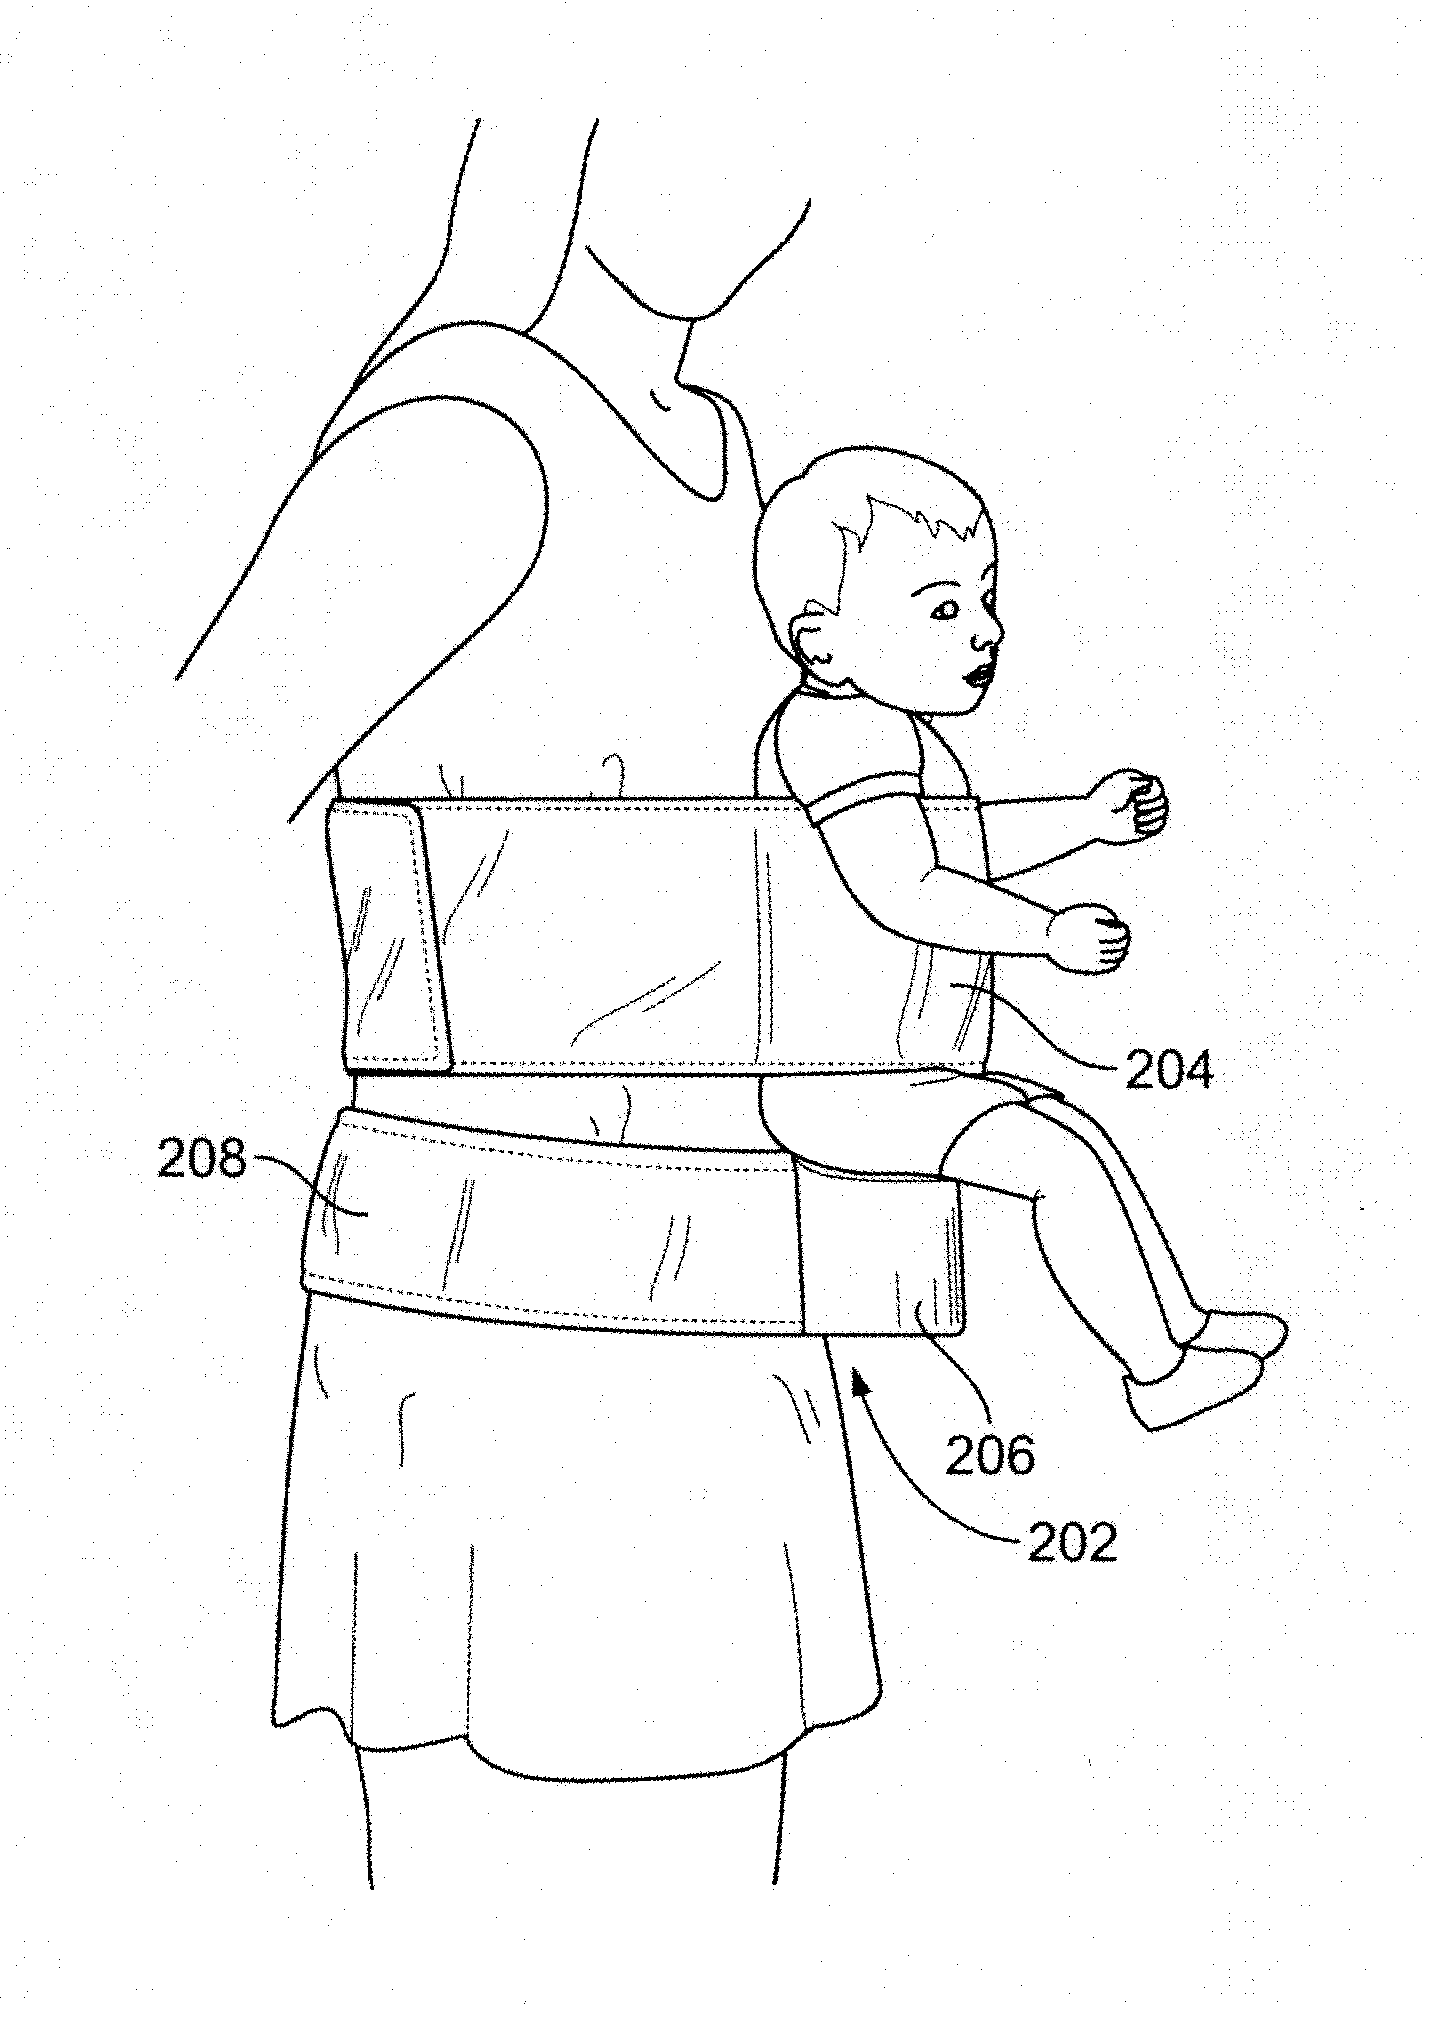 Strap-on child carrier with support seating element